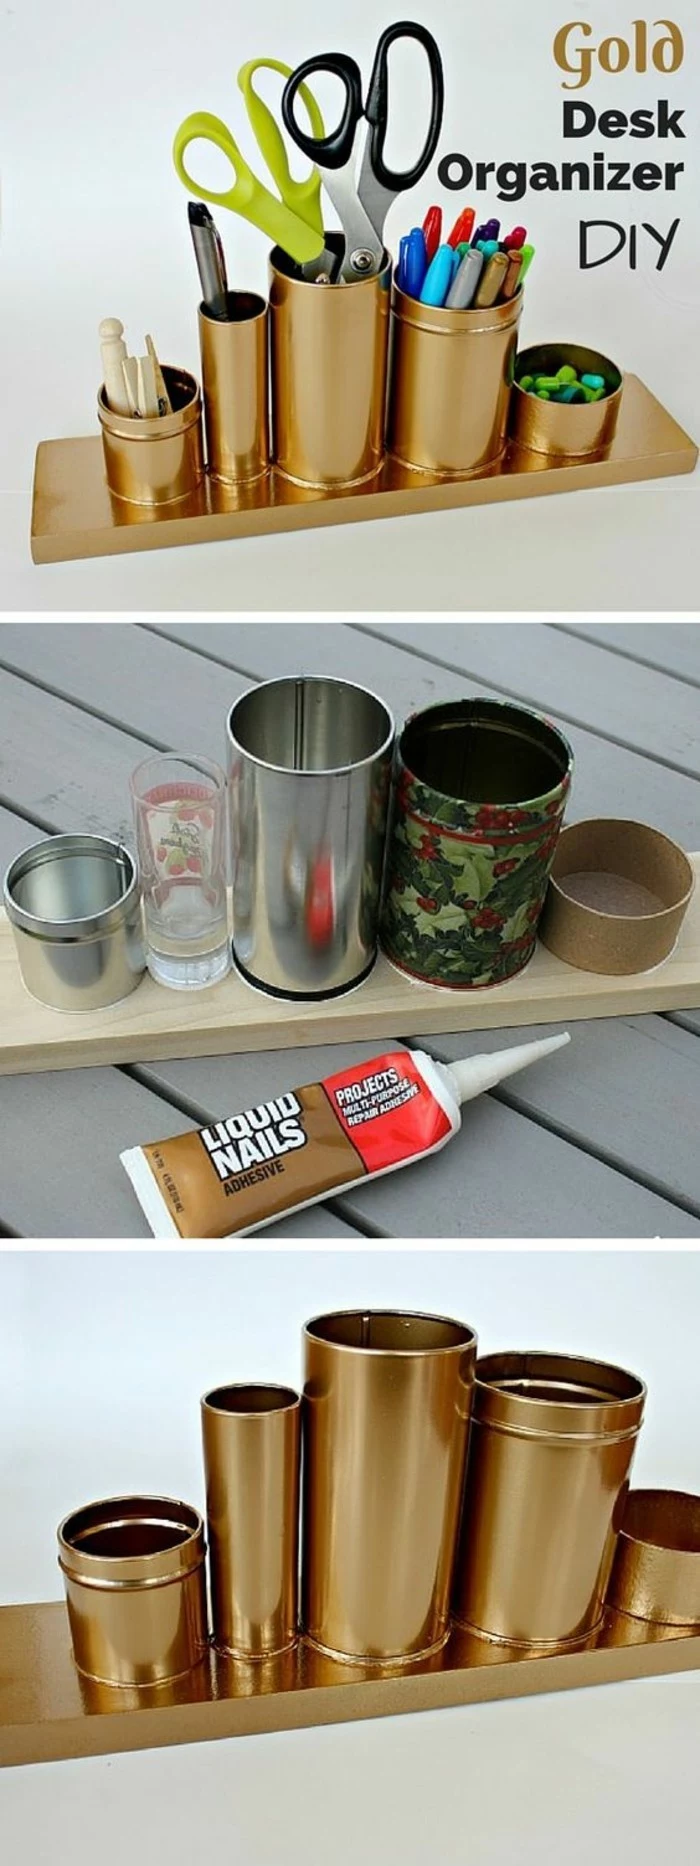 aluminum tins, desk organizer made from differently sized cans, round boxes and a glass, stuck on a wooden plank, all spray painted with copper metallic paint